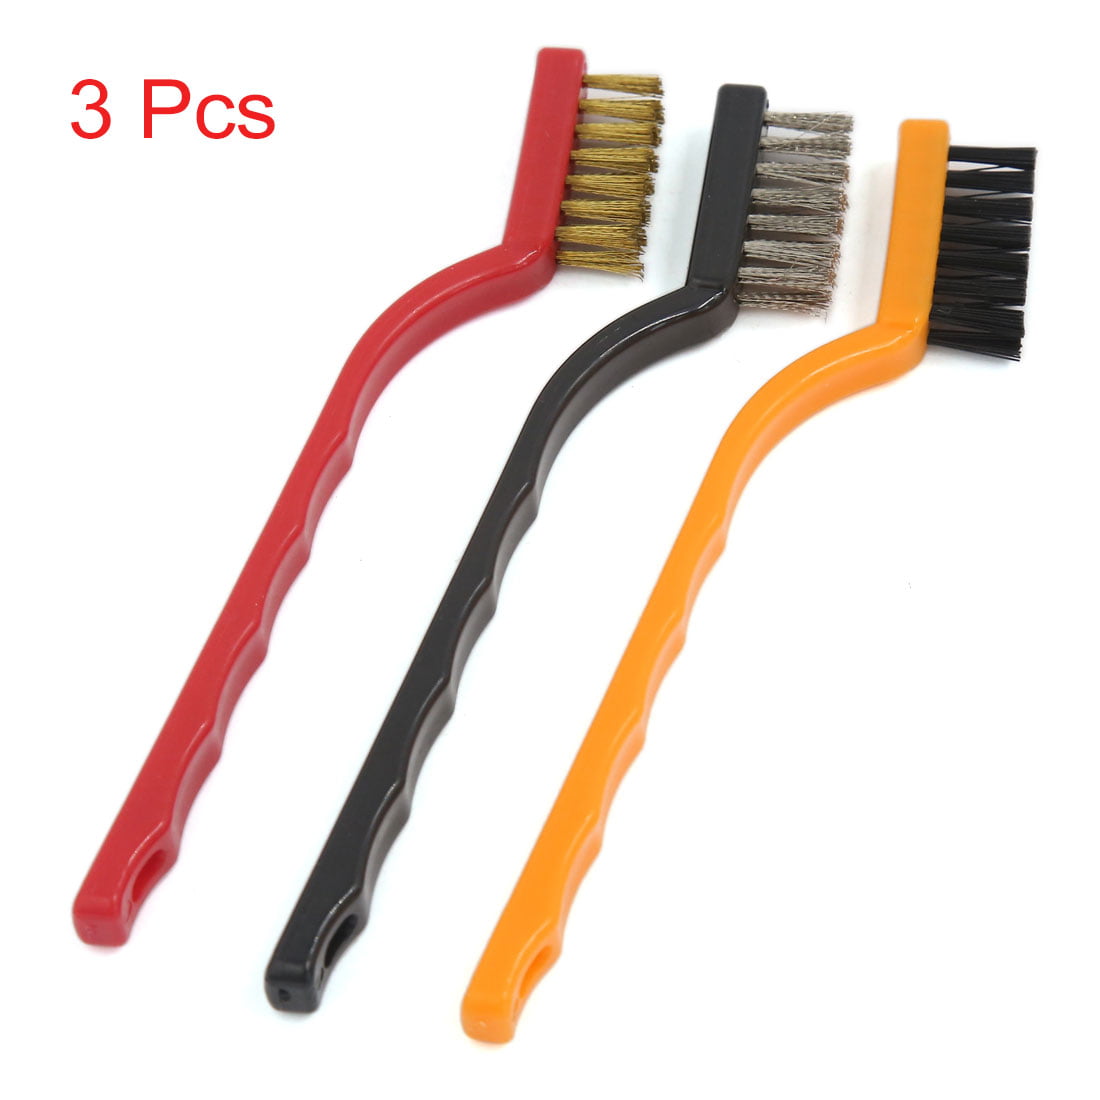 1pc Black Steel Small Brush Cleaning Brushes Wire Spark Wheel Rust Scrub ni E9K4 